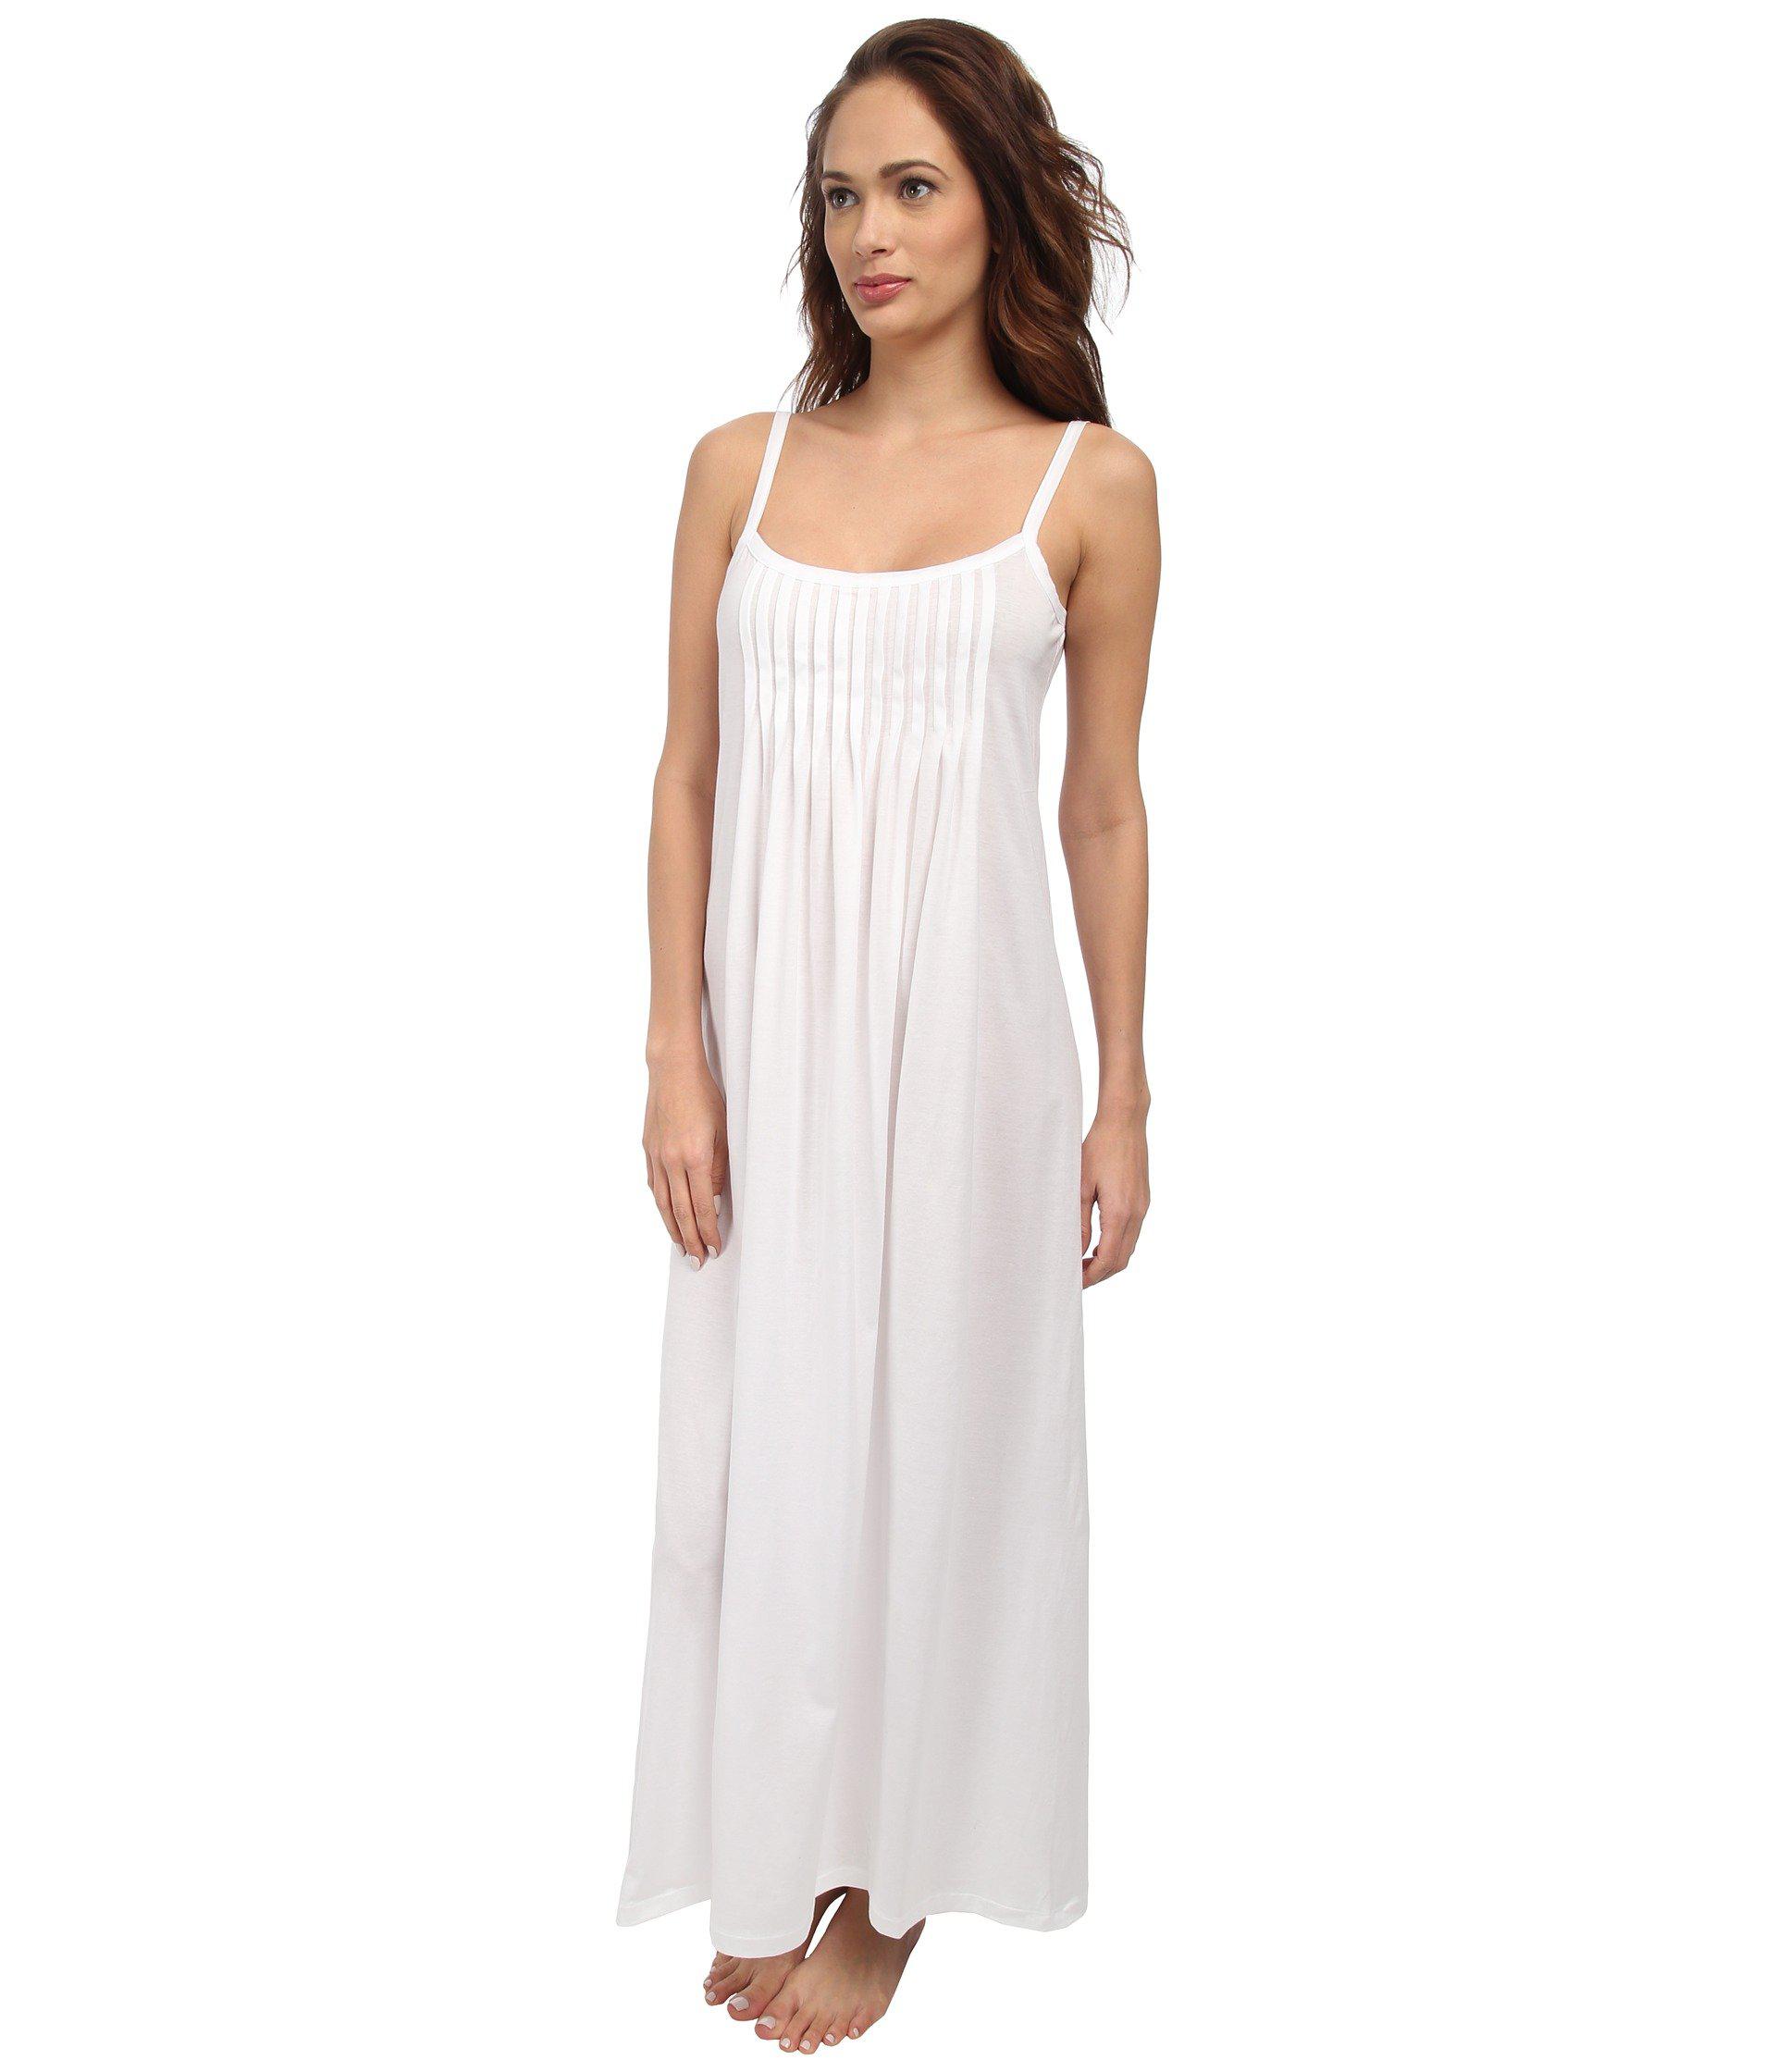 Hanro Cotton ® Juliet Long Chemise in White - Lyst